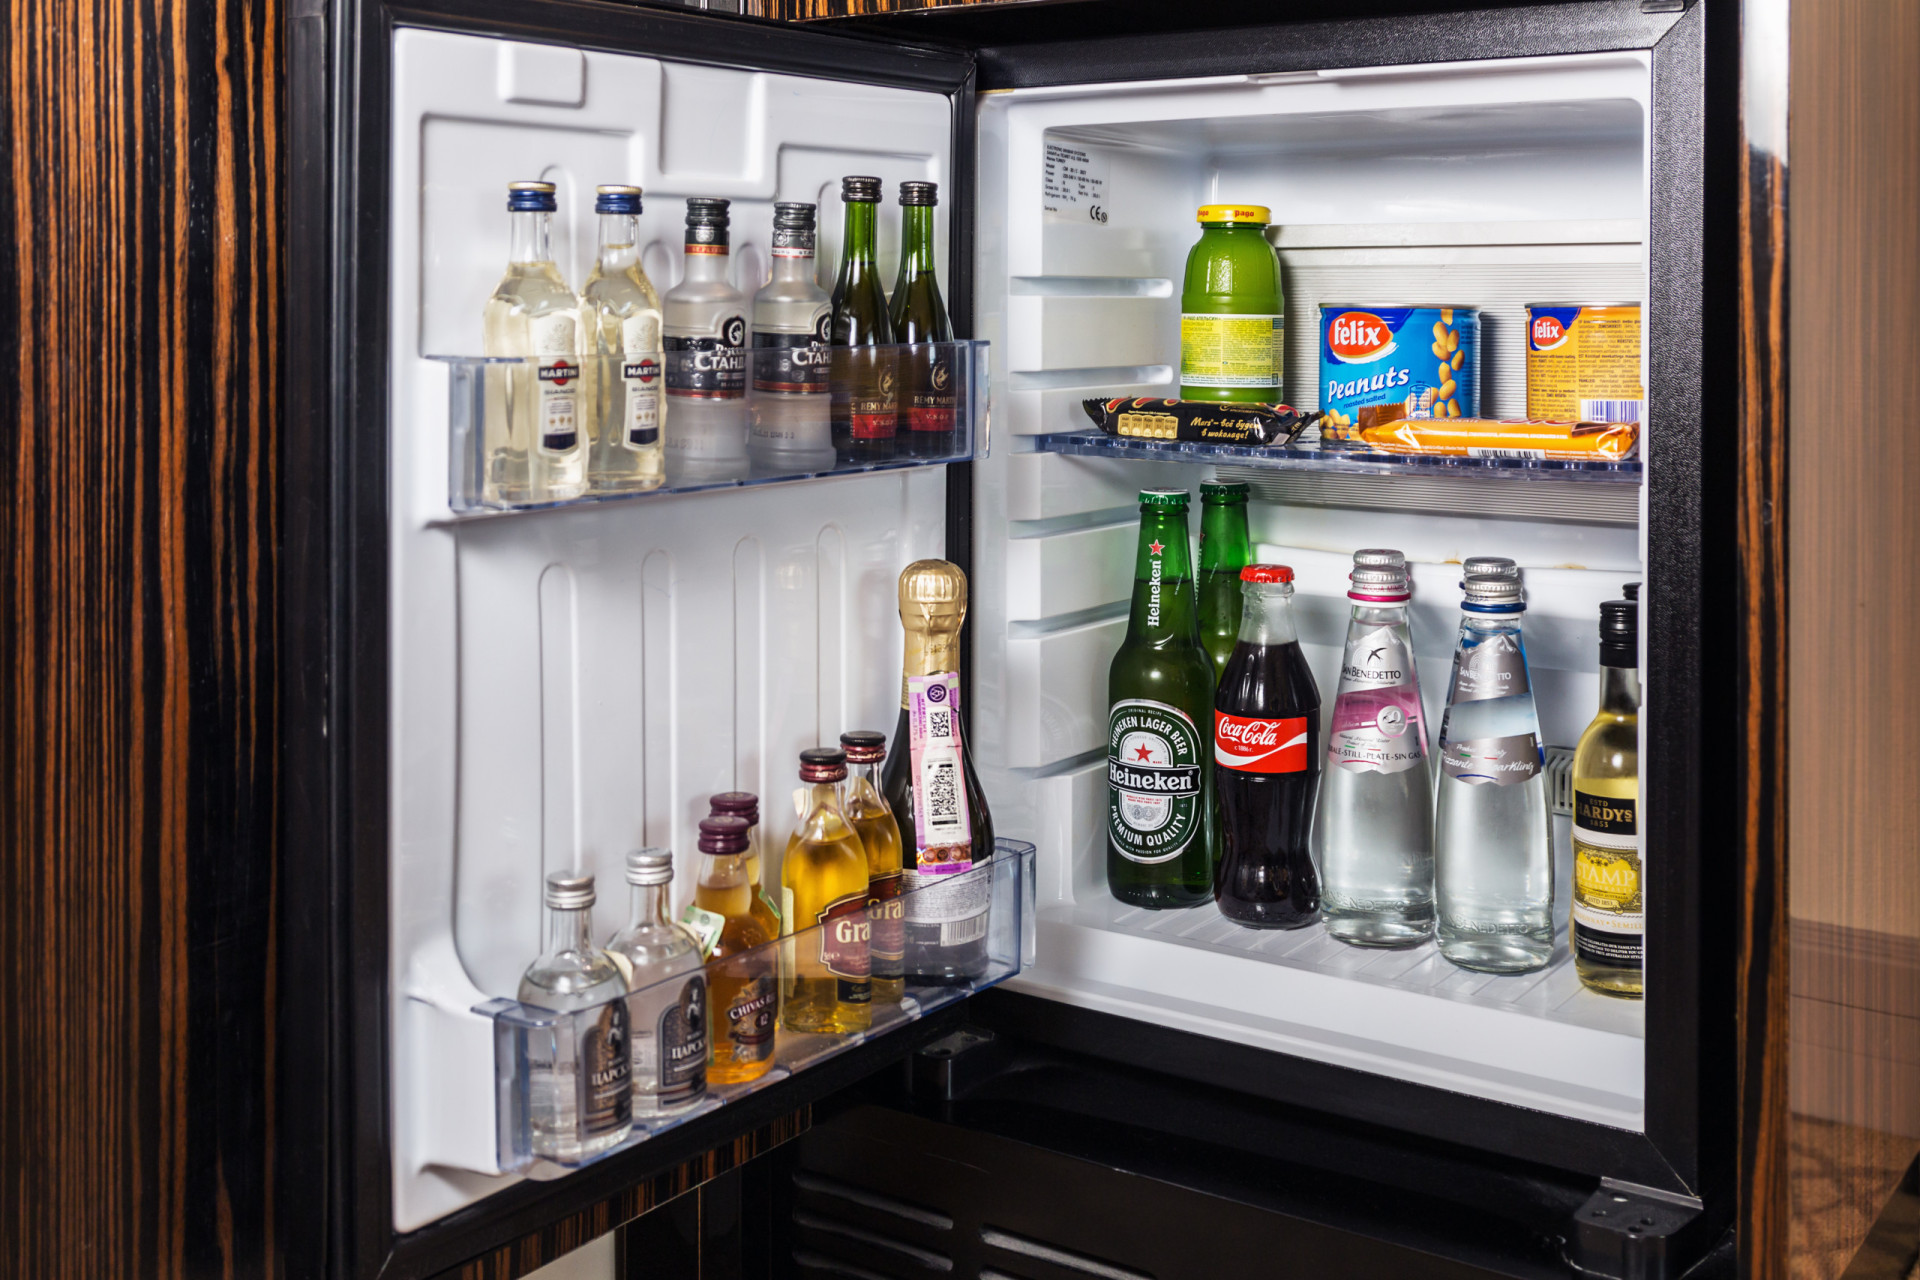 <p>Does your room feature a minibar? If so, is it stocked and included in the price?</p><p>You may also like:<a href="https://www.starsinsider.com/n/443816?utm_source=msn.com&utm_medium=display&utm_campaign=referral_description&utm_content=562106en-en"> Which celebs are fighting to legalize marijuana? </a></p>